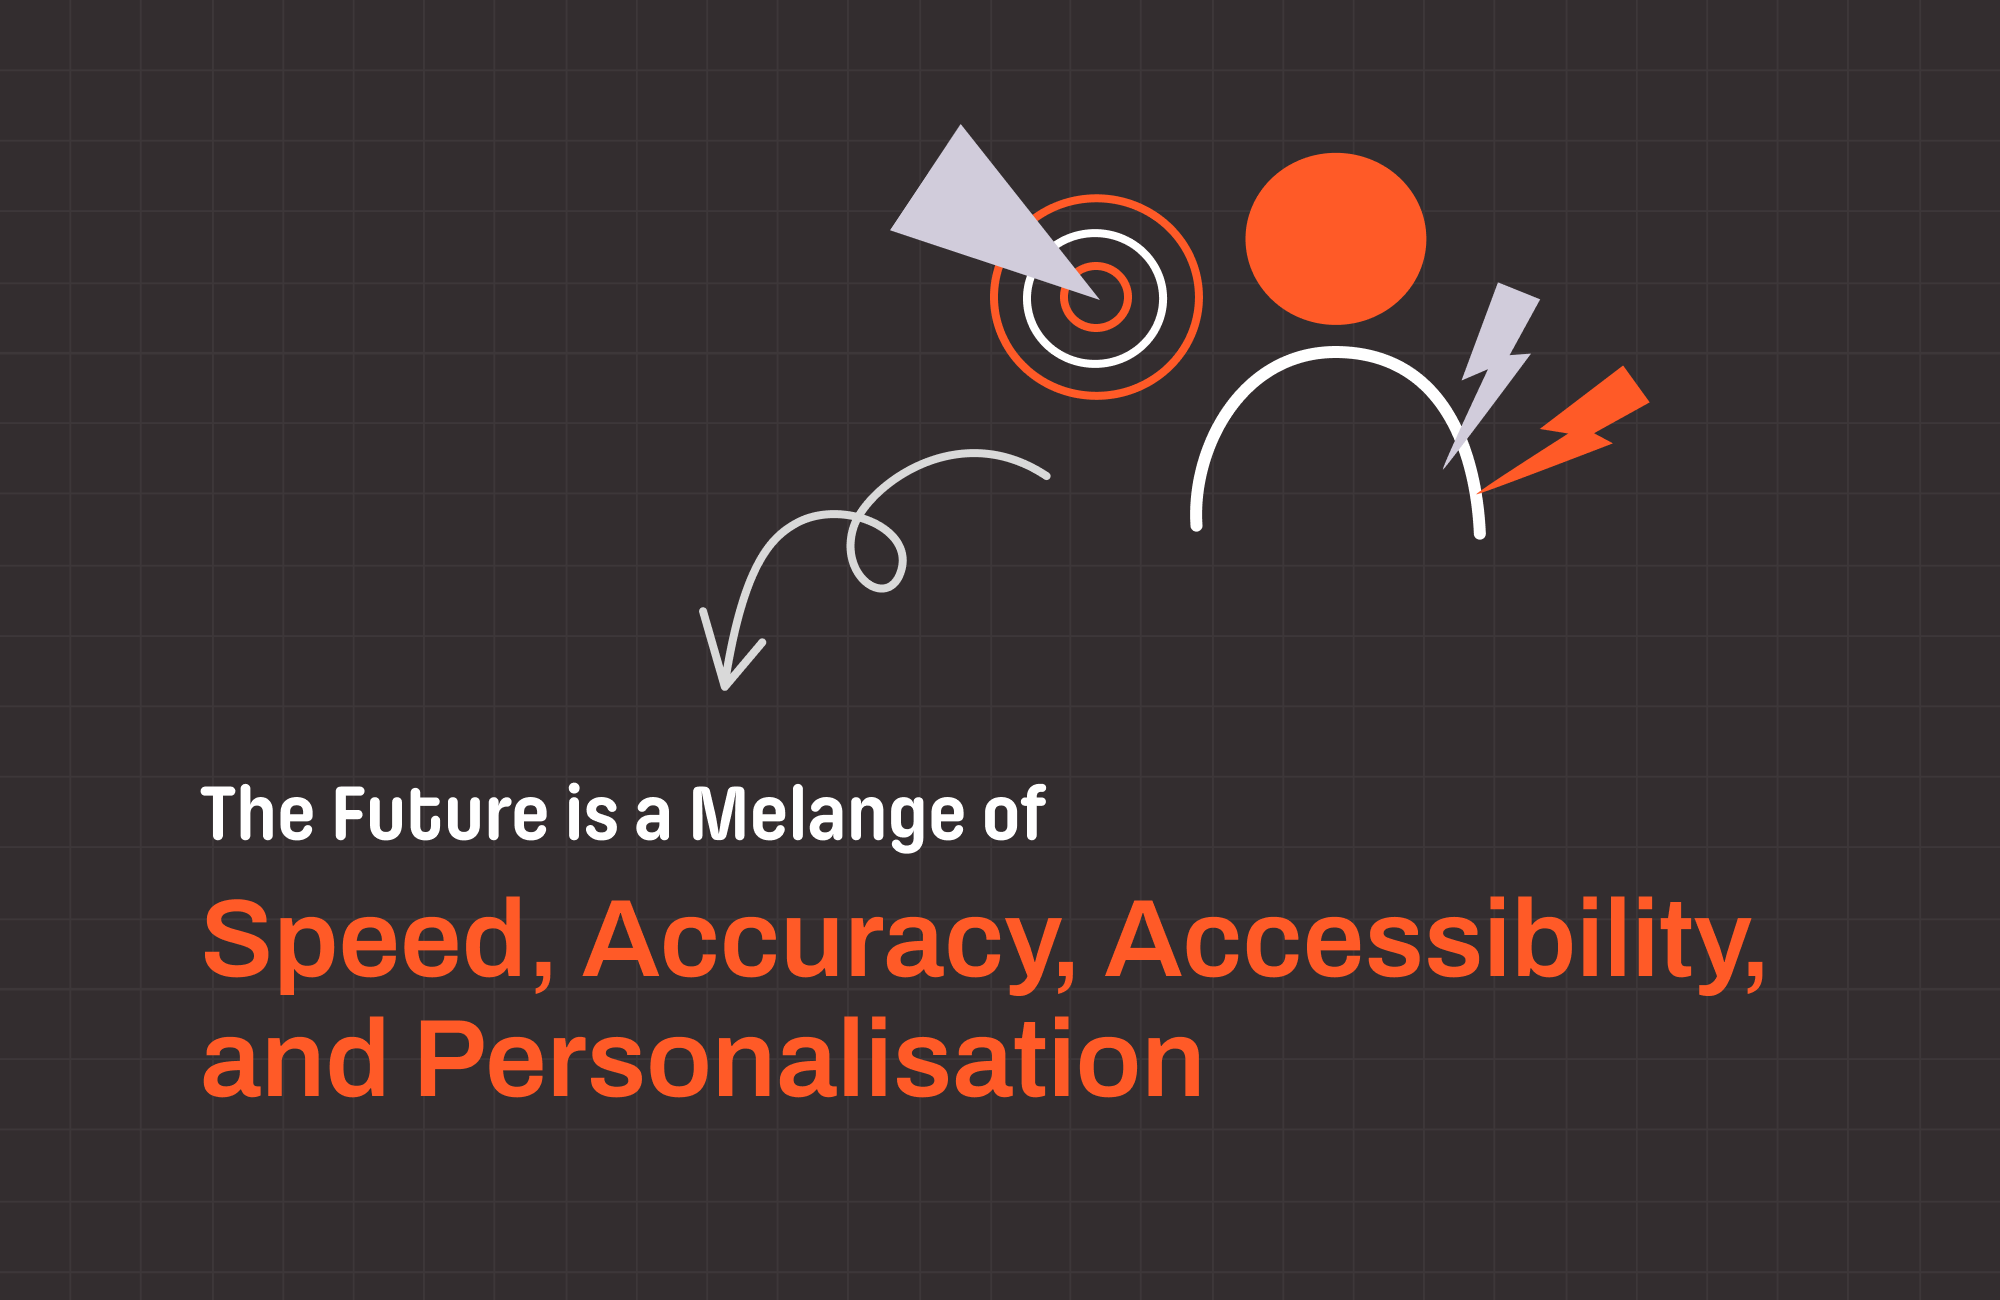 The Future is a Melange of Speed, Accuracy, Accessibility, and Personalisation